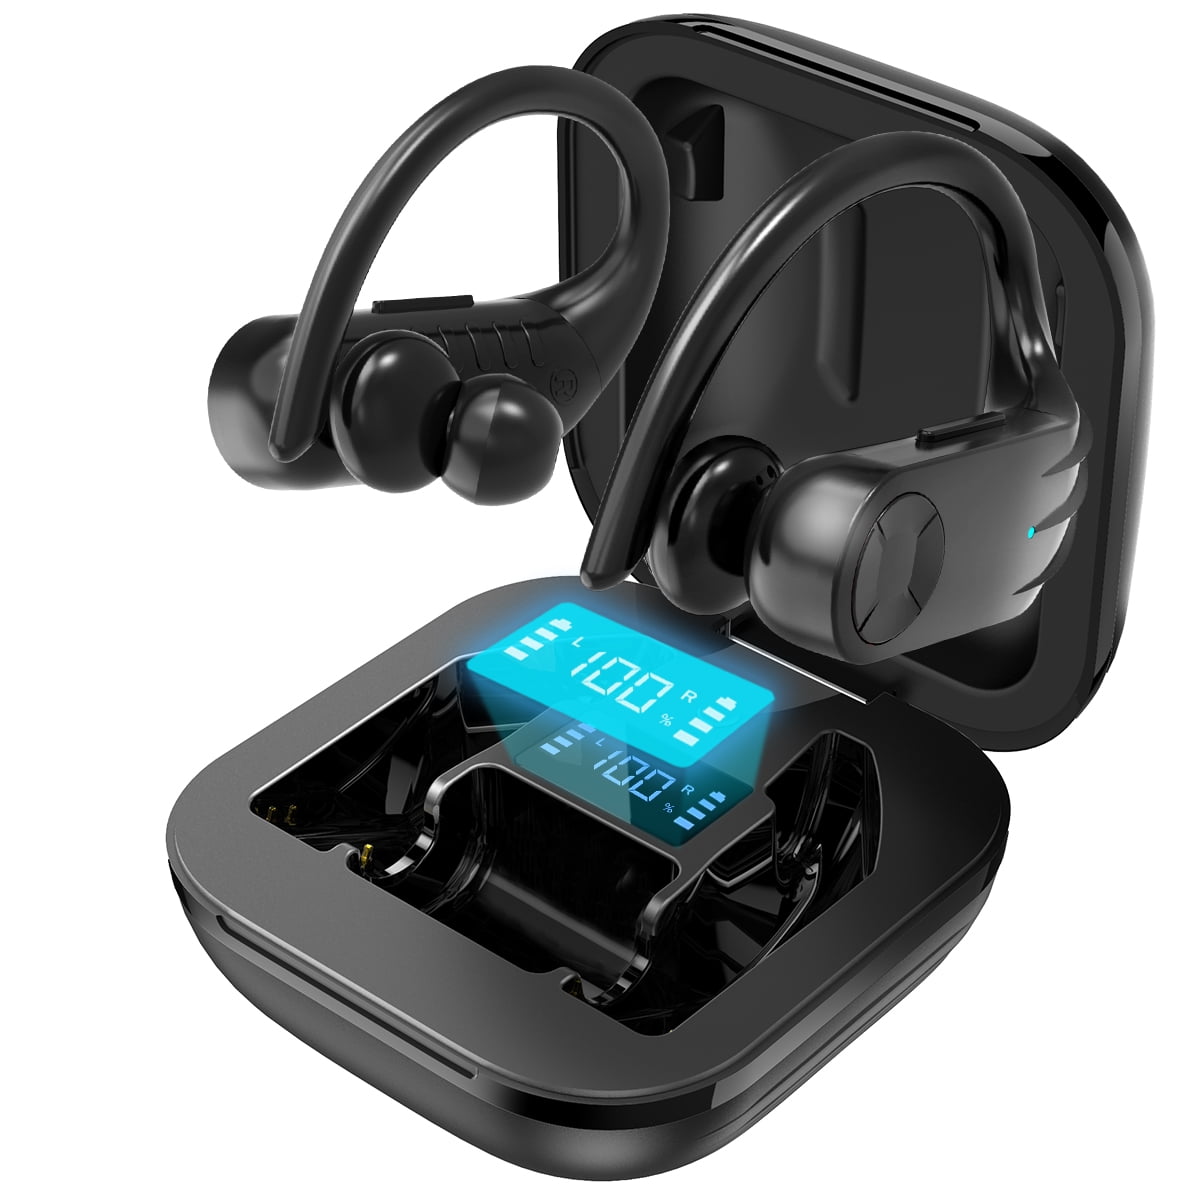 Wireless Earbuds PRO Bluetooth Headphone for iPhone/Android with Charging case 